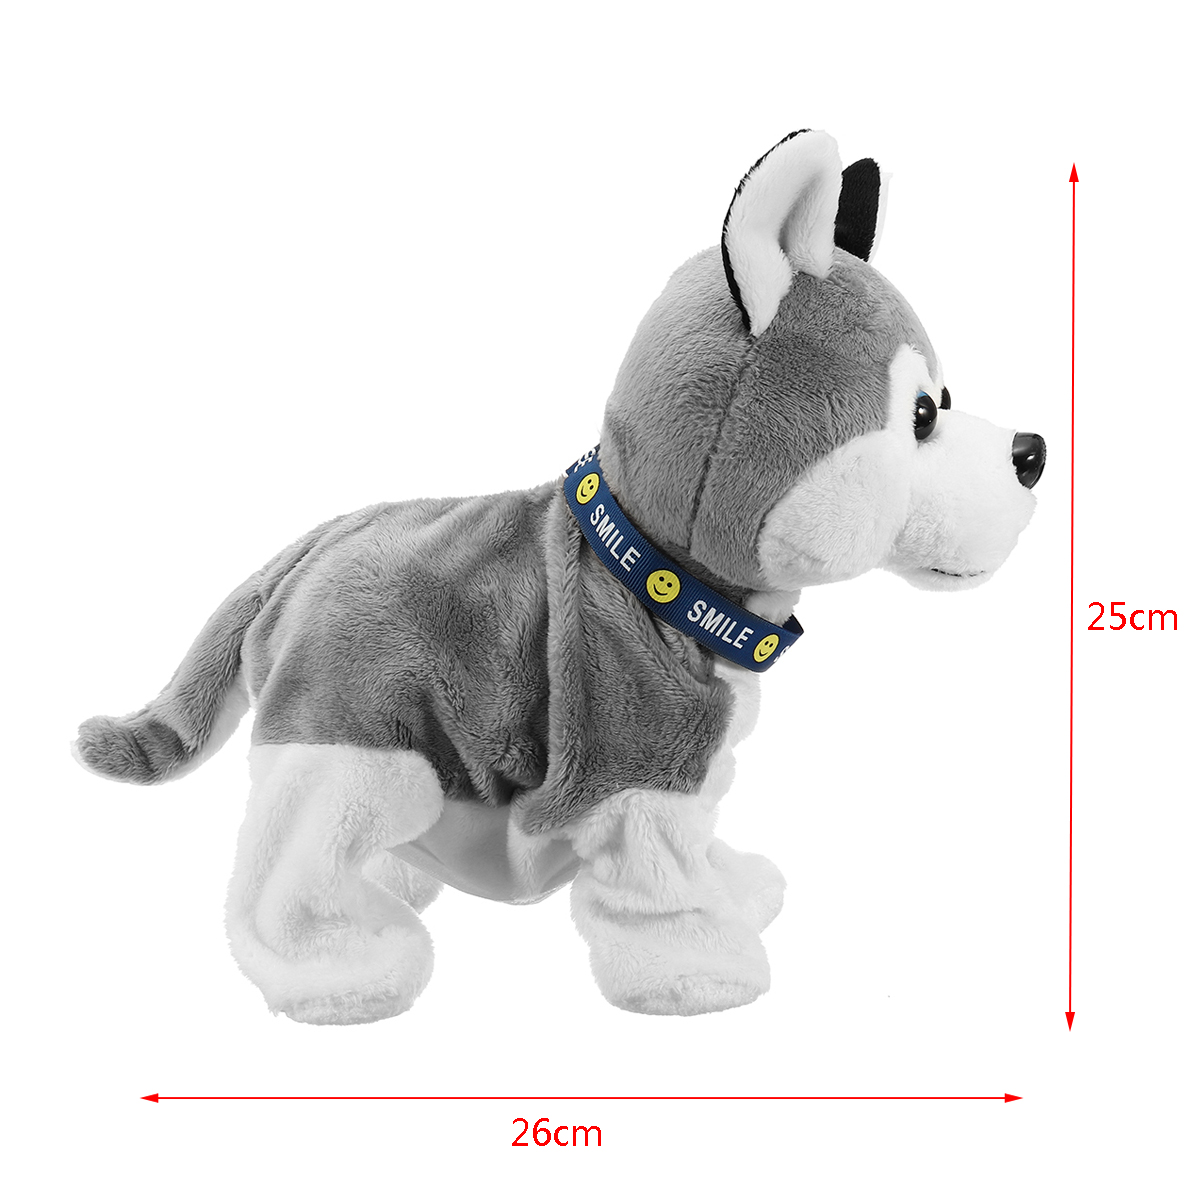 Interactive-Dog-Electronic-Pet-Stuffed-Plush-Toy-Control-Walk-Sound-Husky-Reacts-Touch-1414452-11